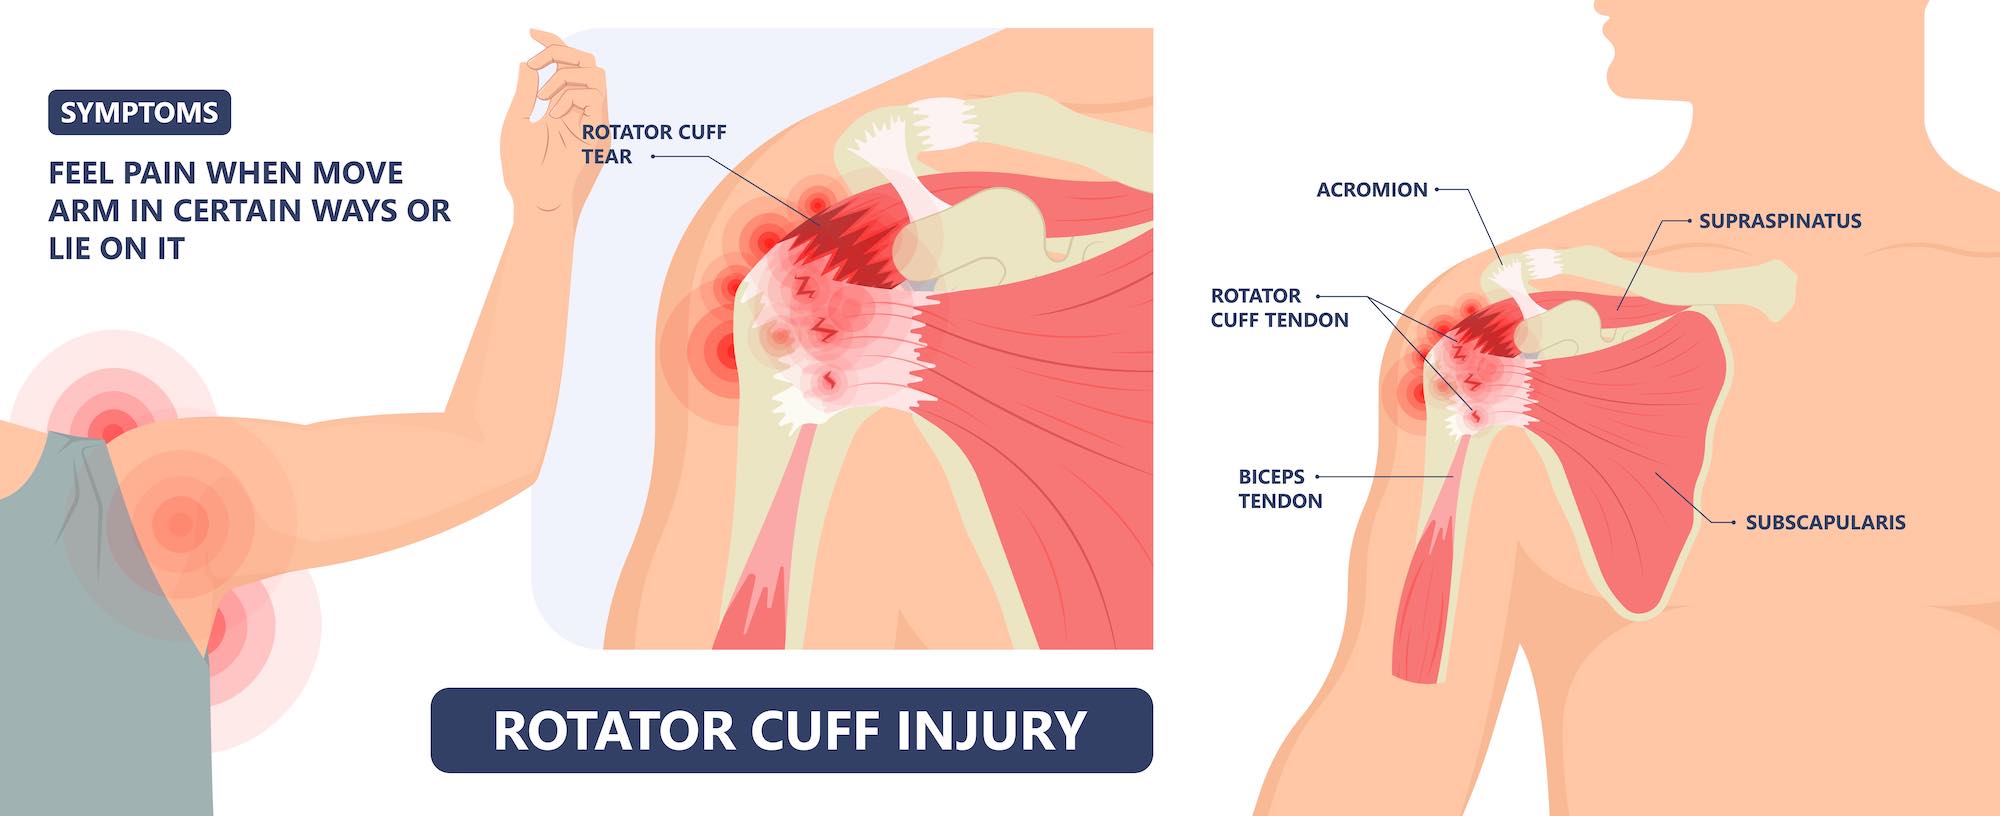 Rotator Cuff Tears: Causes, Symptoms and Treatment Options